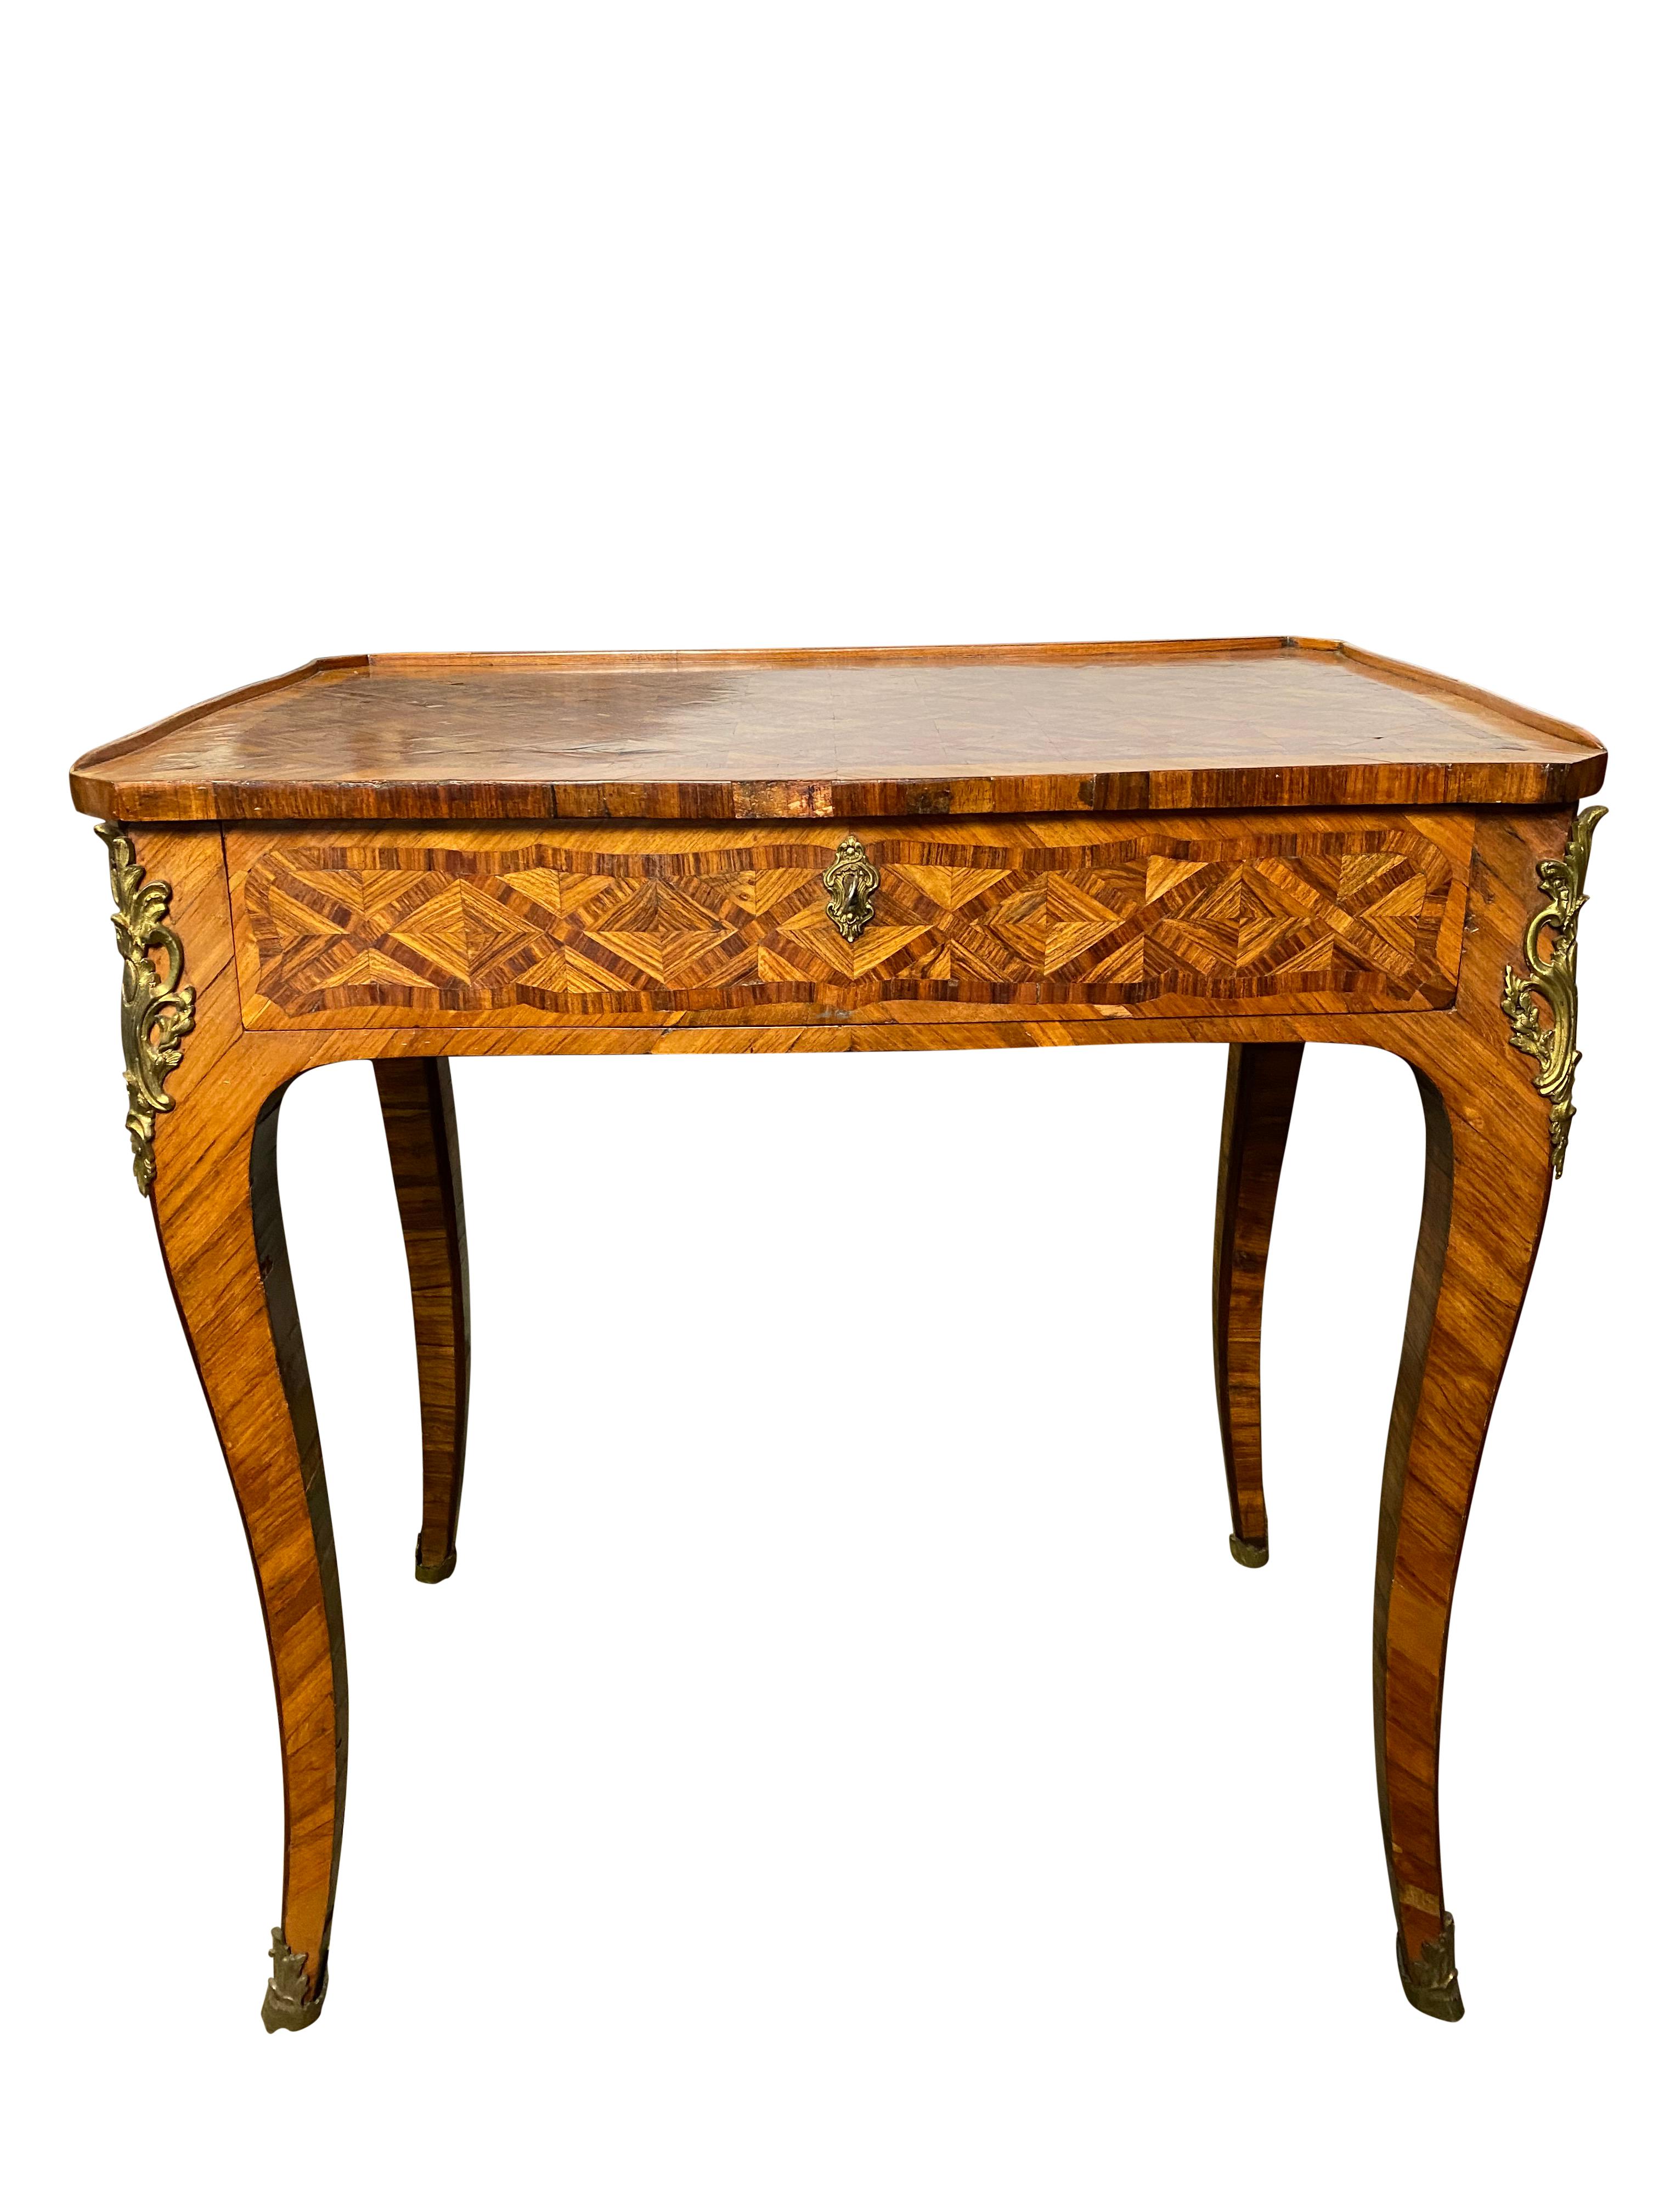 A fine French marquetry inlaid kingwood table with well-figured top and lock and key drawer. Mutiple 
differential grain patterns throughout the table and lavished in metallic embellishments on the lateral sides of each leg. 

Dimensions (cm)
H